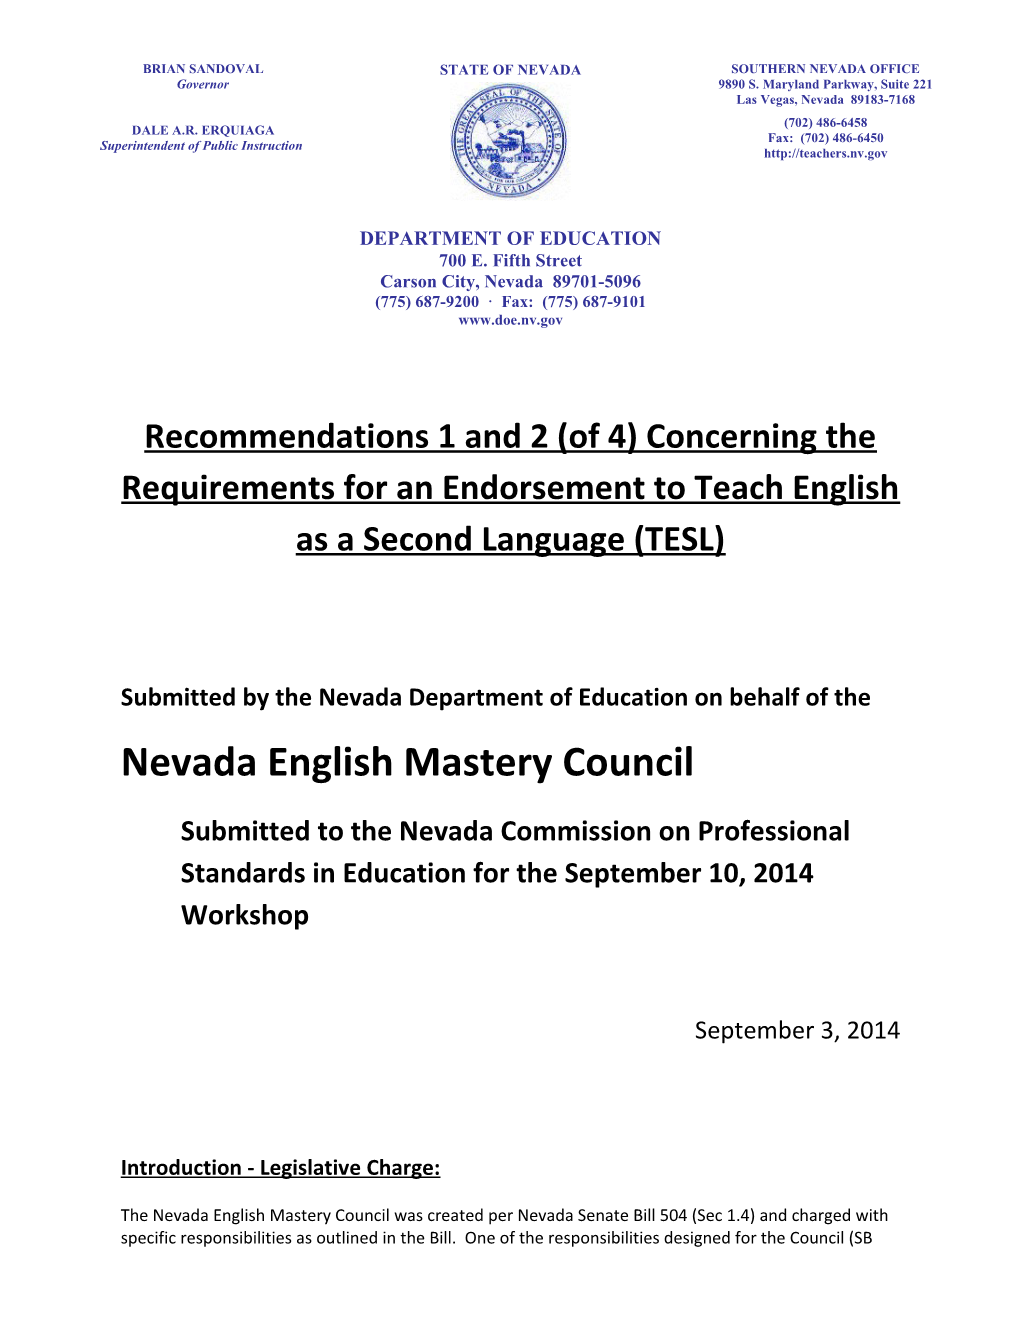 Nevada English Mastery Council: Recommendations Concerning the Requirements for an Endorsement